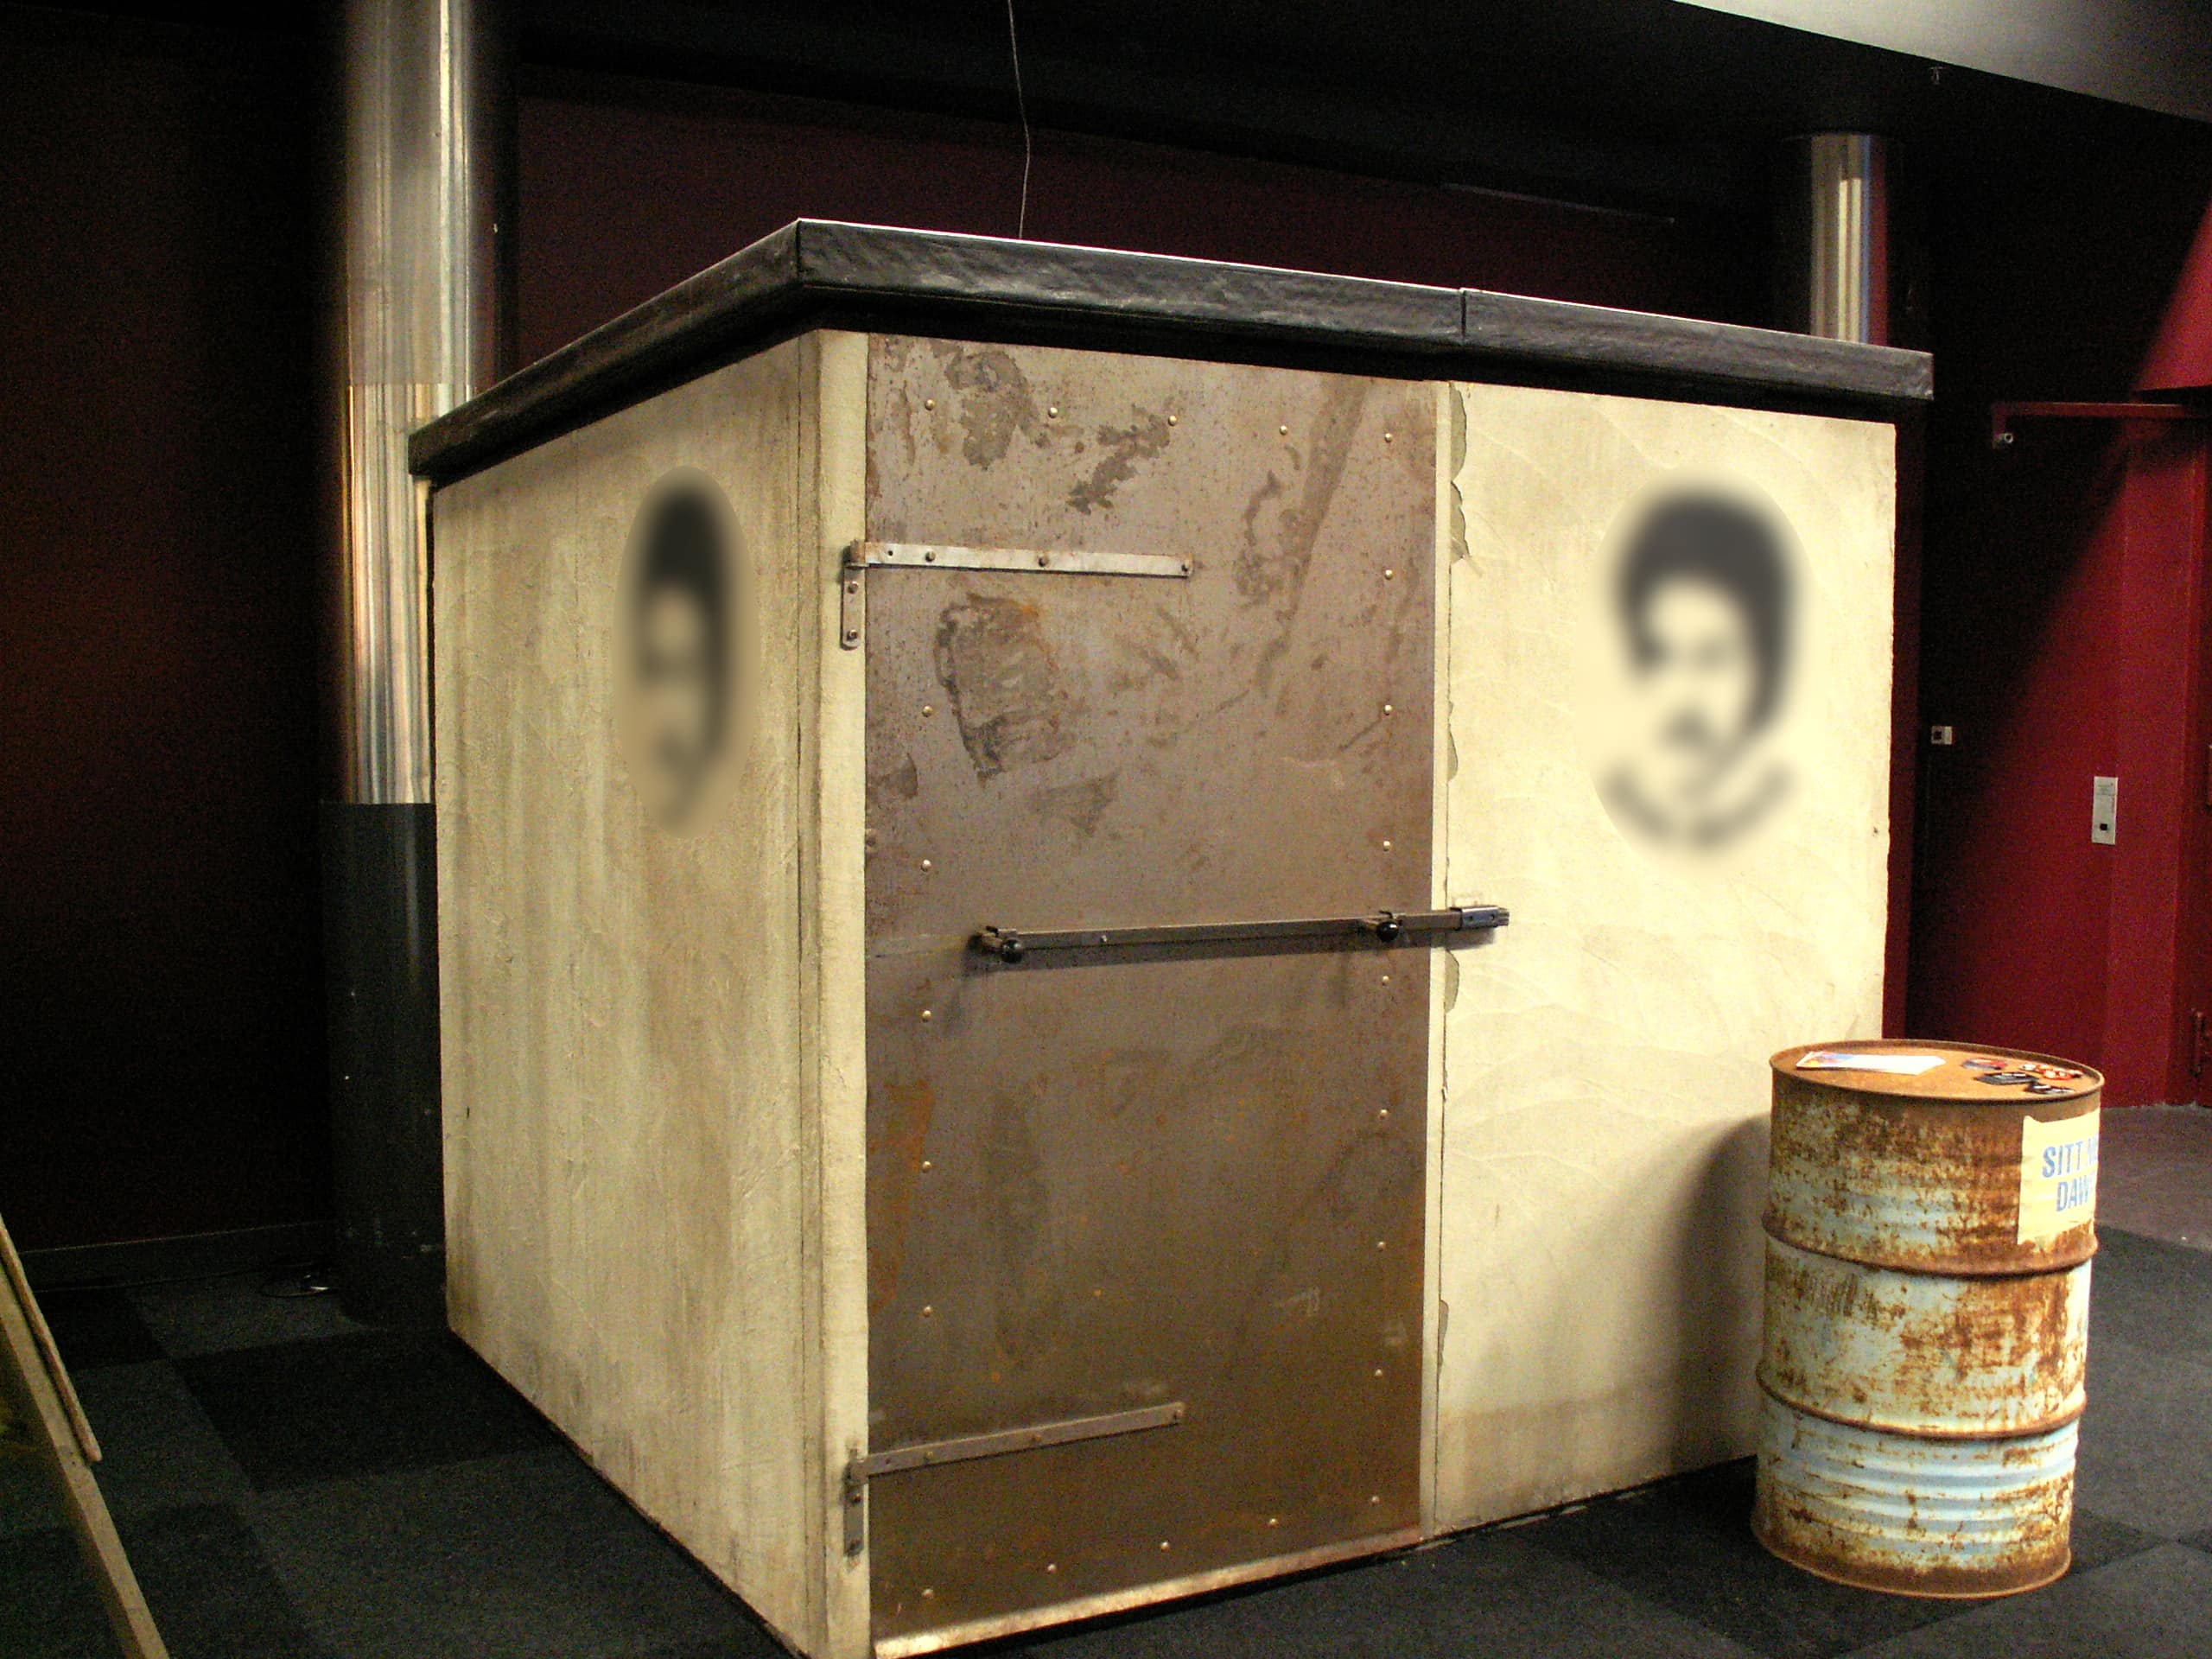 Constructed copy of Dawit Isaak's presumed Eritrean prison cell, Gothenburg, Sweden, 2015, A.J. Andersson/Wikimedia Commons